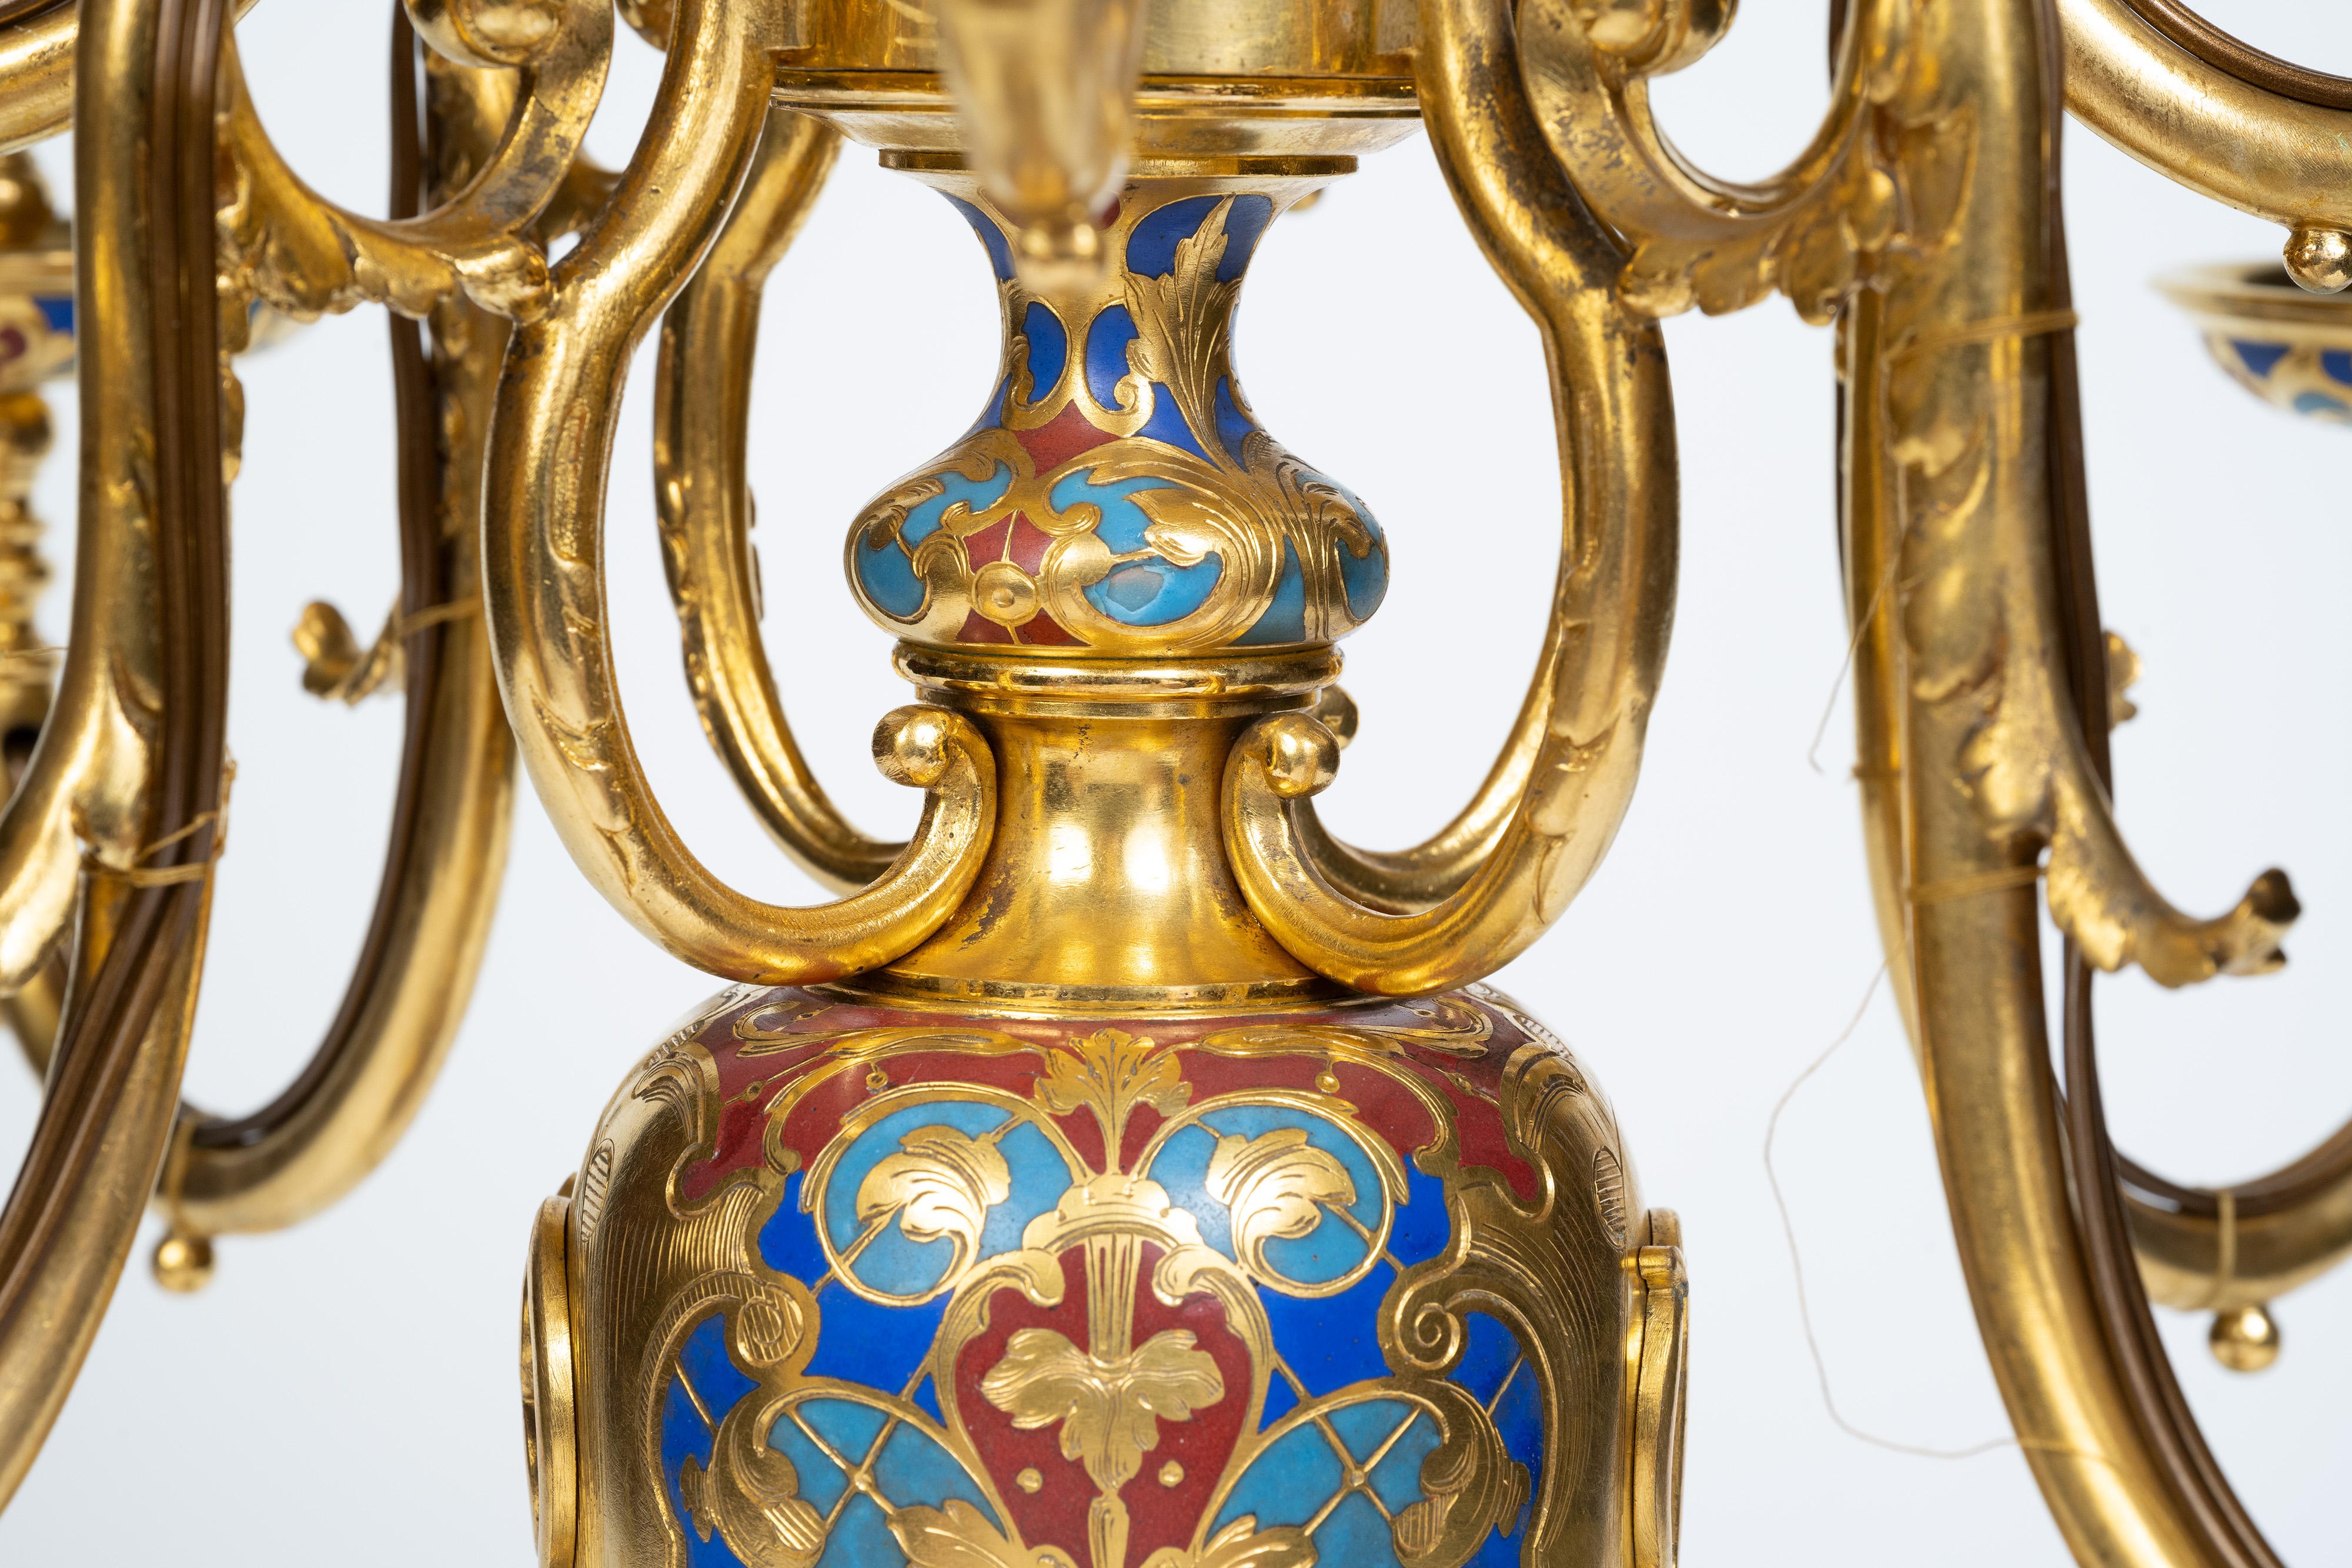 An Exceptional Pair of Champleve Enamel Ormolu Candelabra by Sevin & Barbedienne For Sale 6